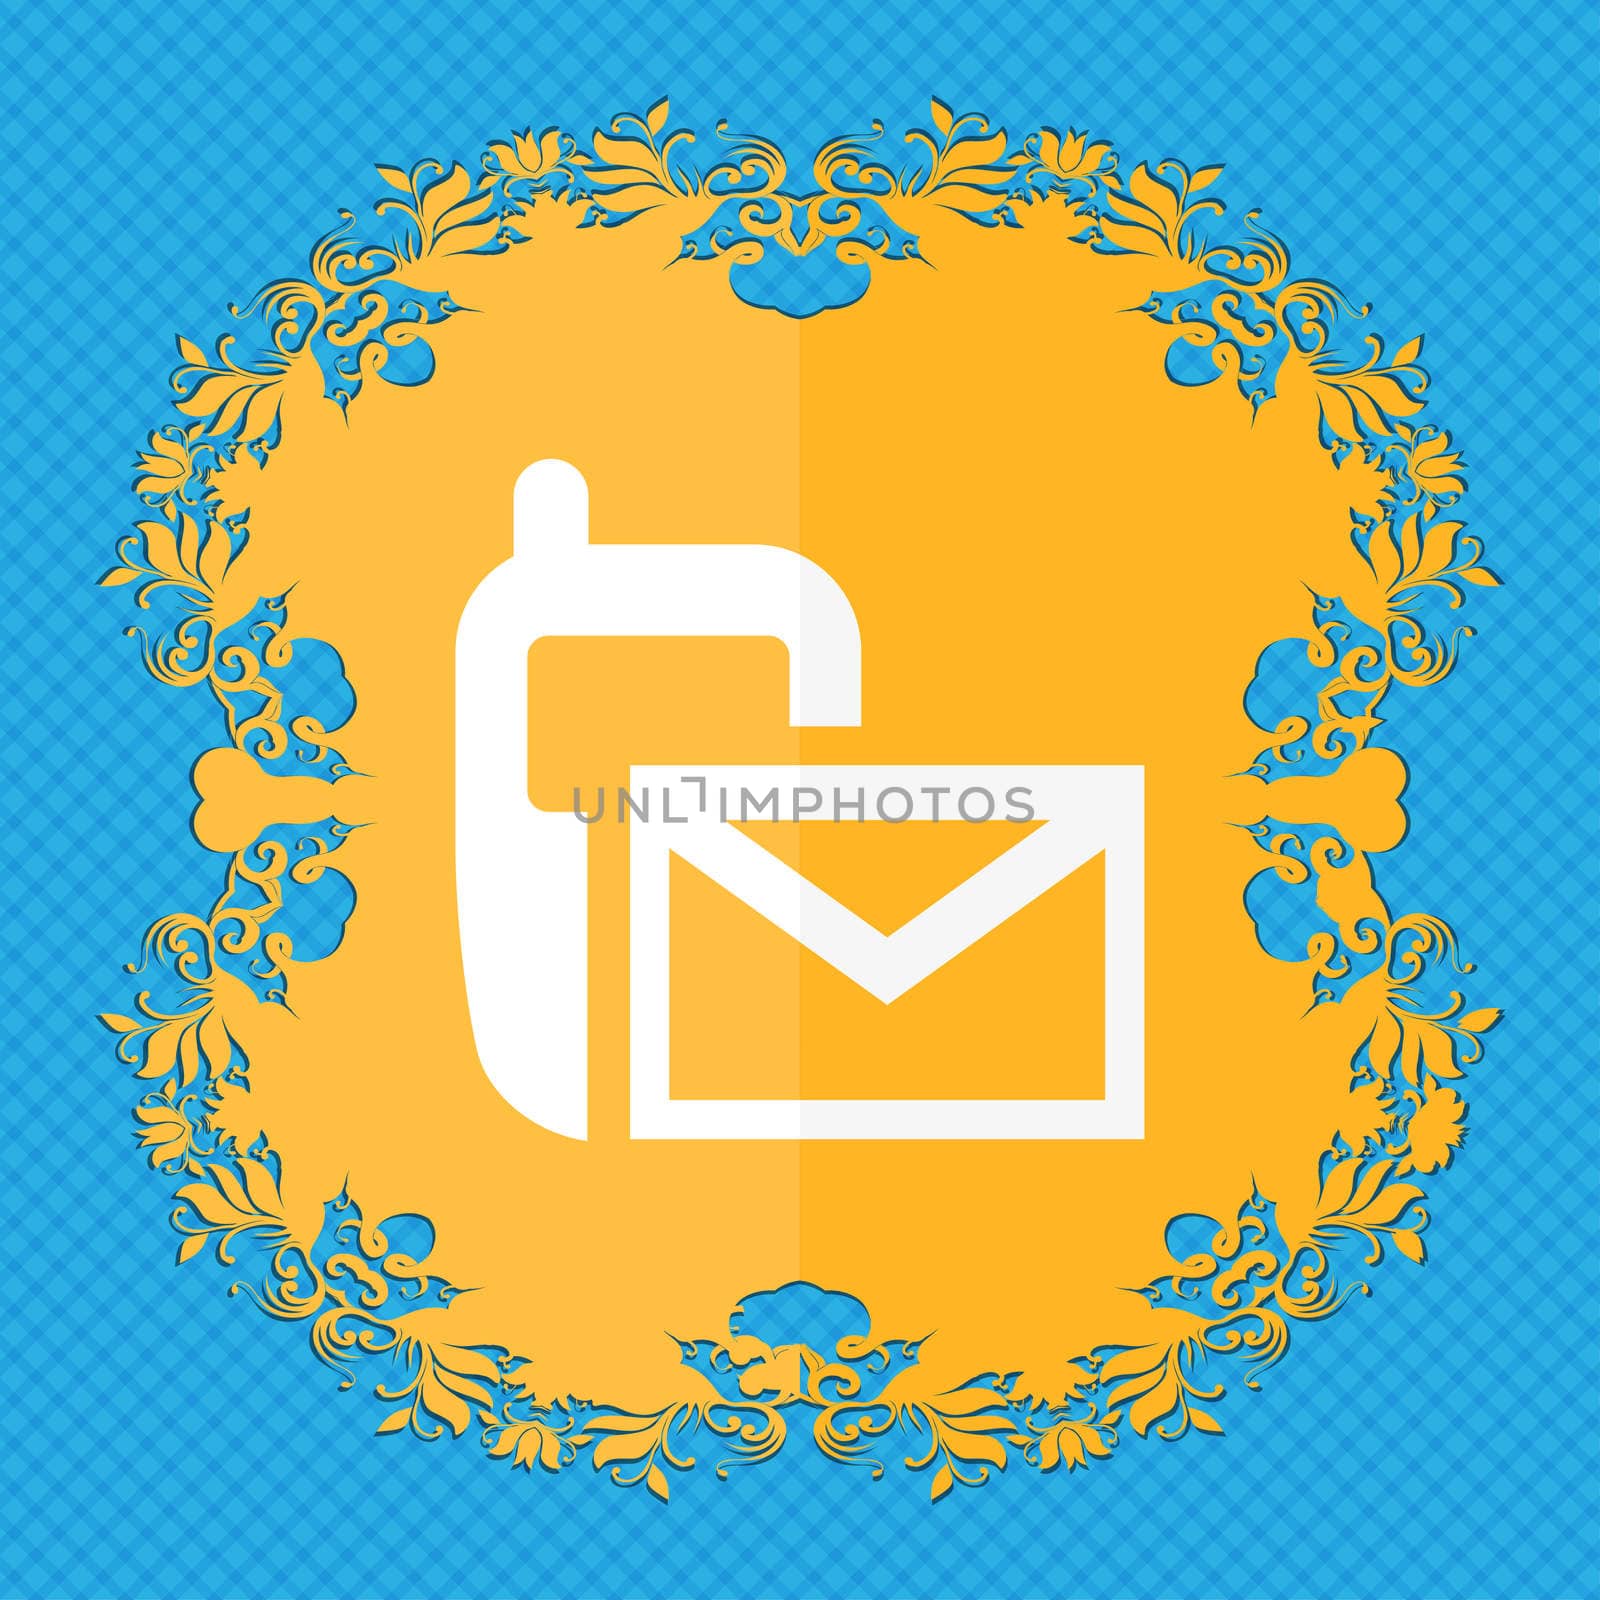 Mail icon. Envelope symbol. Message sms sign. Floral flat design on a blue abstract background with place for your text. illustration